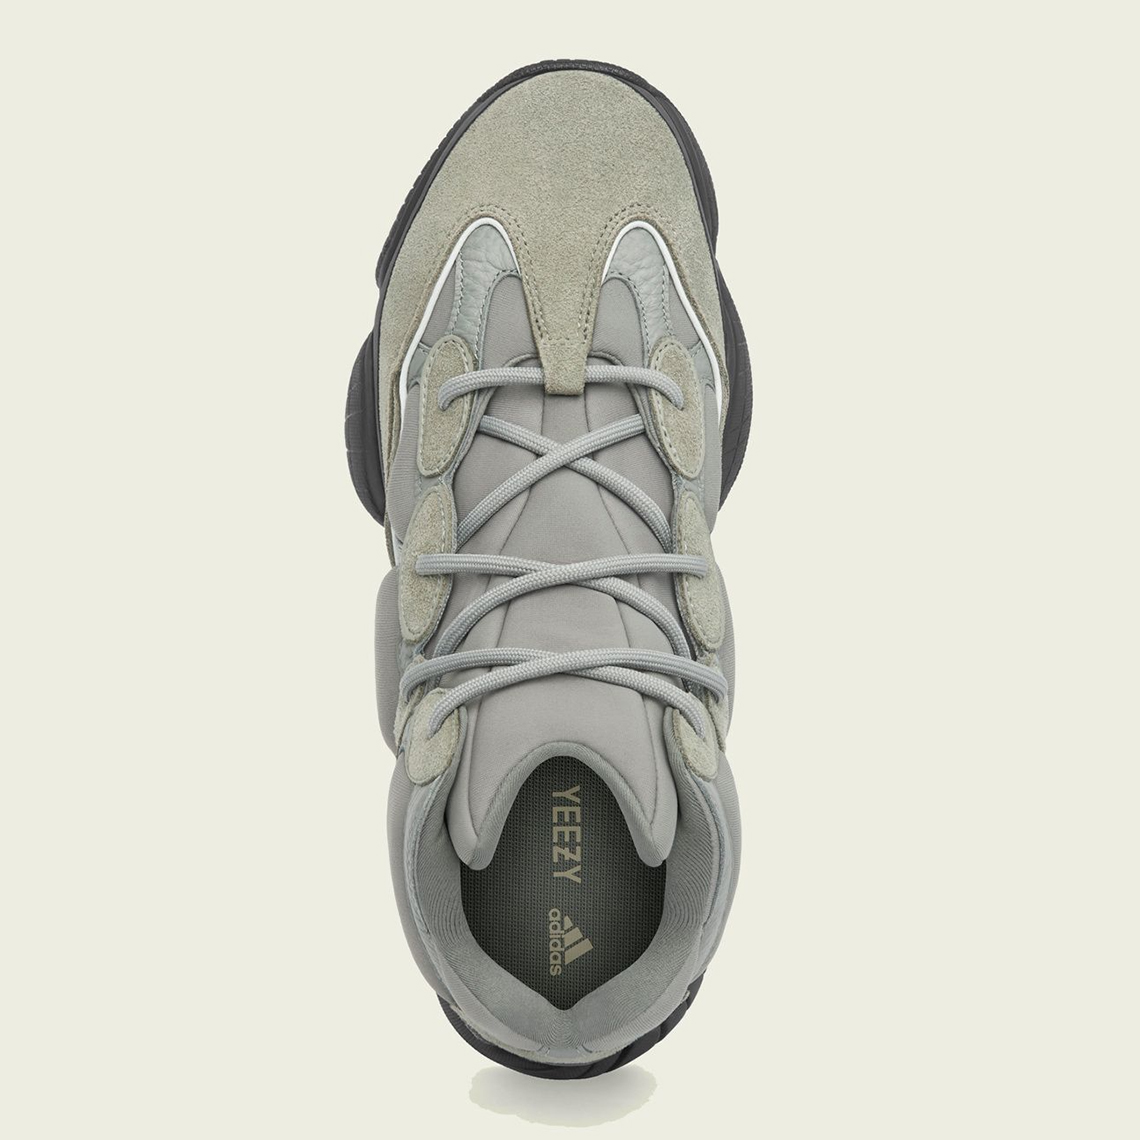 Adidas Yeezy 500 High Gy0393 Release Date 2